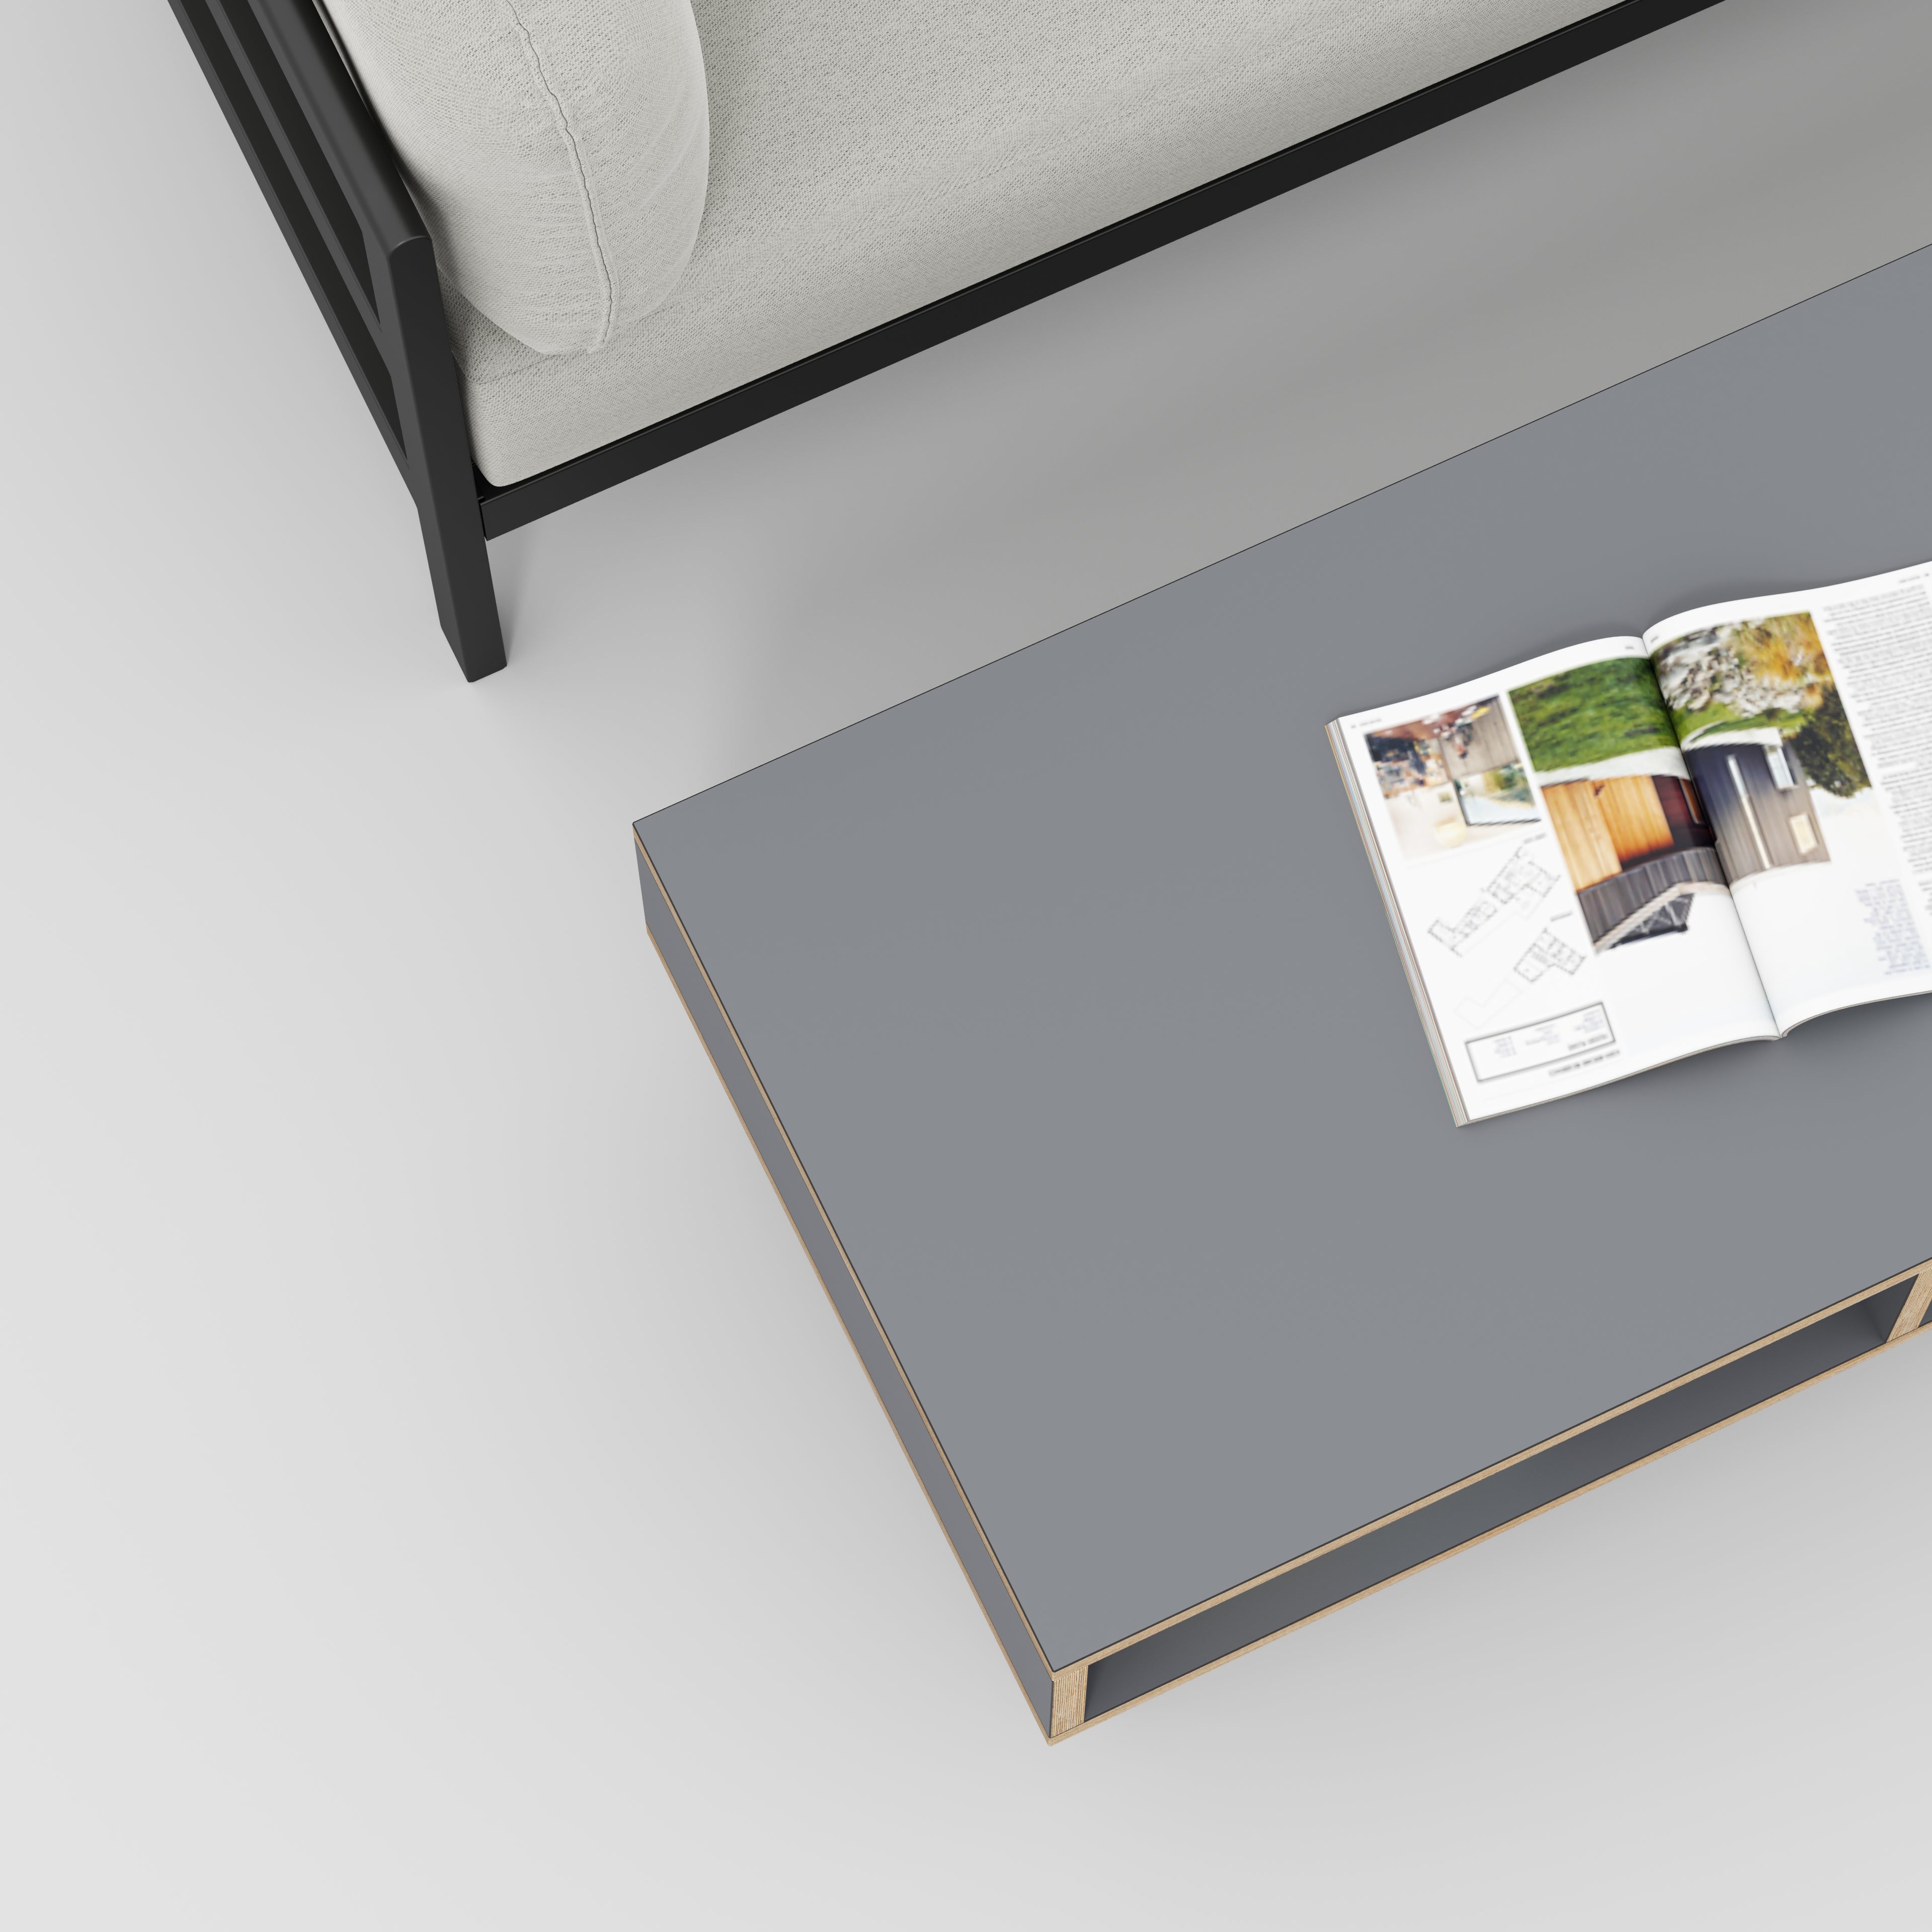 Coffee Table with Box Storage and Black Hairpin Legs - Formica Tornado Grey - 1200(w) x 600(d) x 400(h)